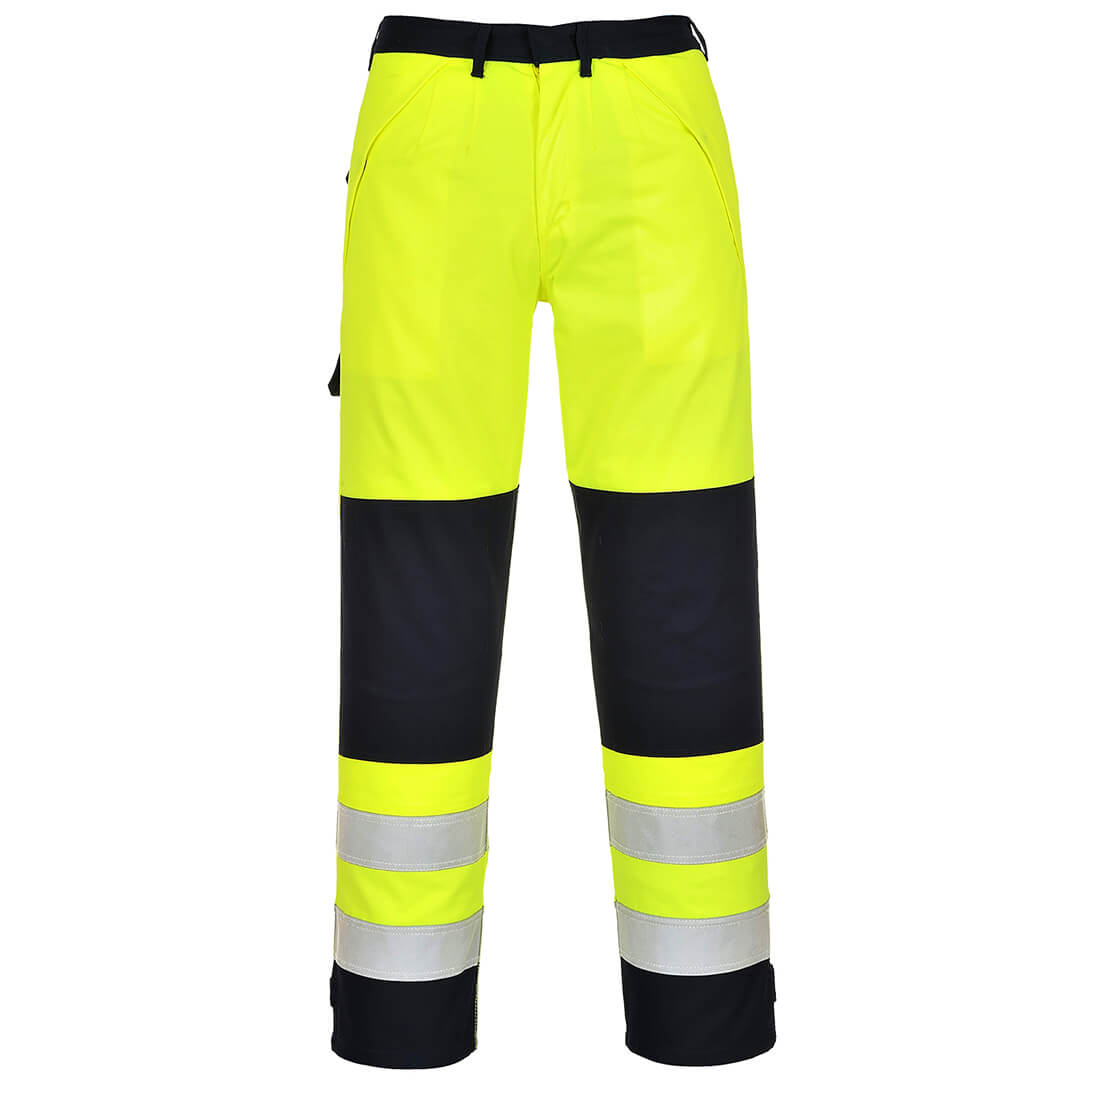 Photo of Biz Flame Hi Vis Multi-norm Flame Resistant Trousers Yellow / Navy S